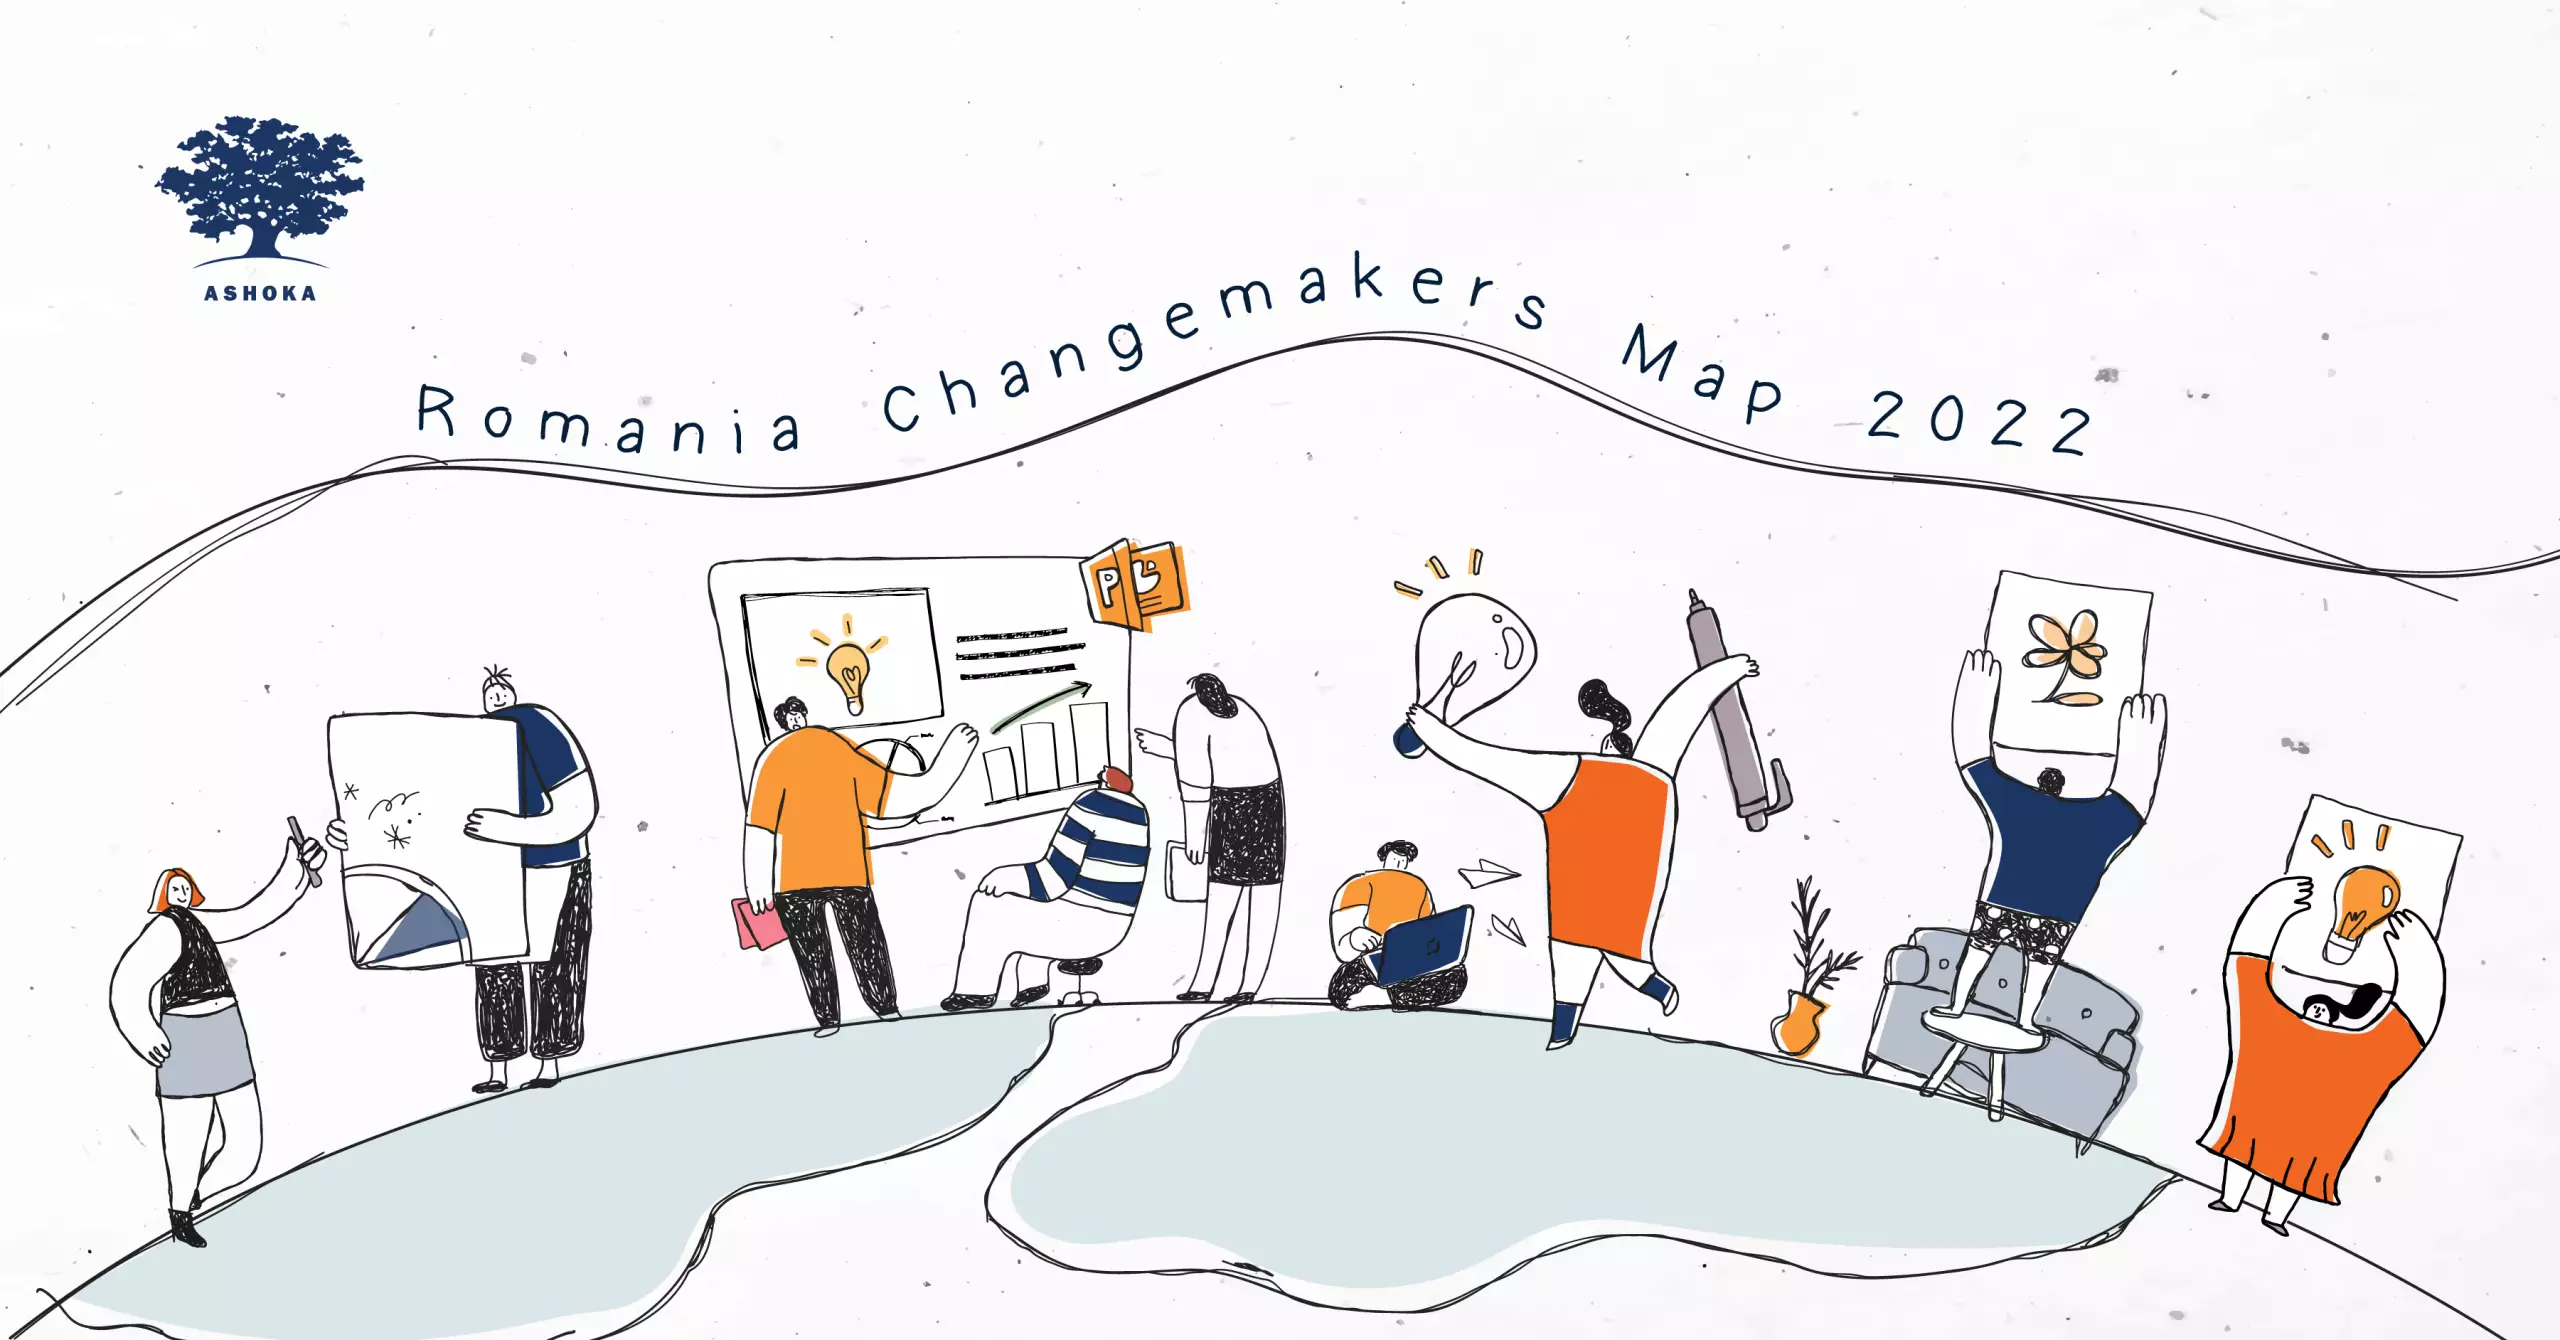 An illustrated image with several people sharing ideas. Across the top of the image in a handwritten script reads "Romania Changemakers Map 2022" accompanied by the Ashoka logo.